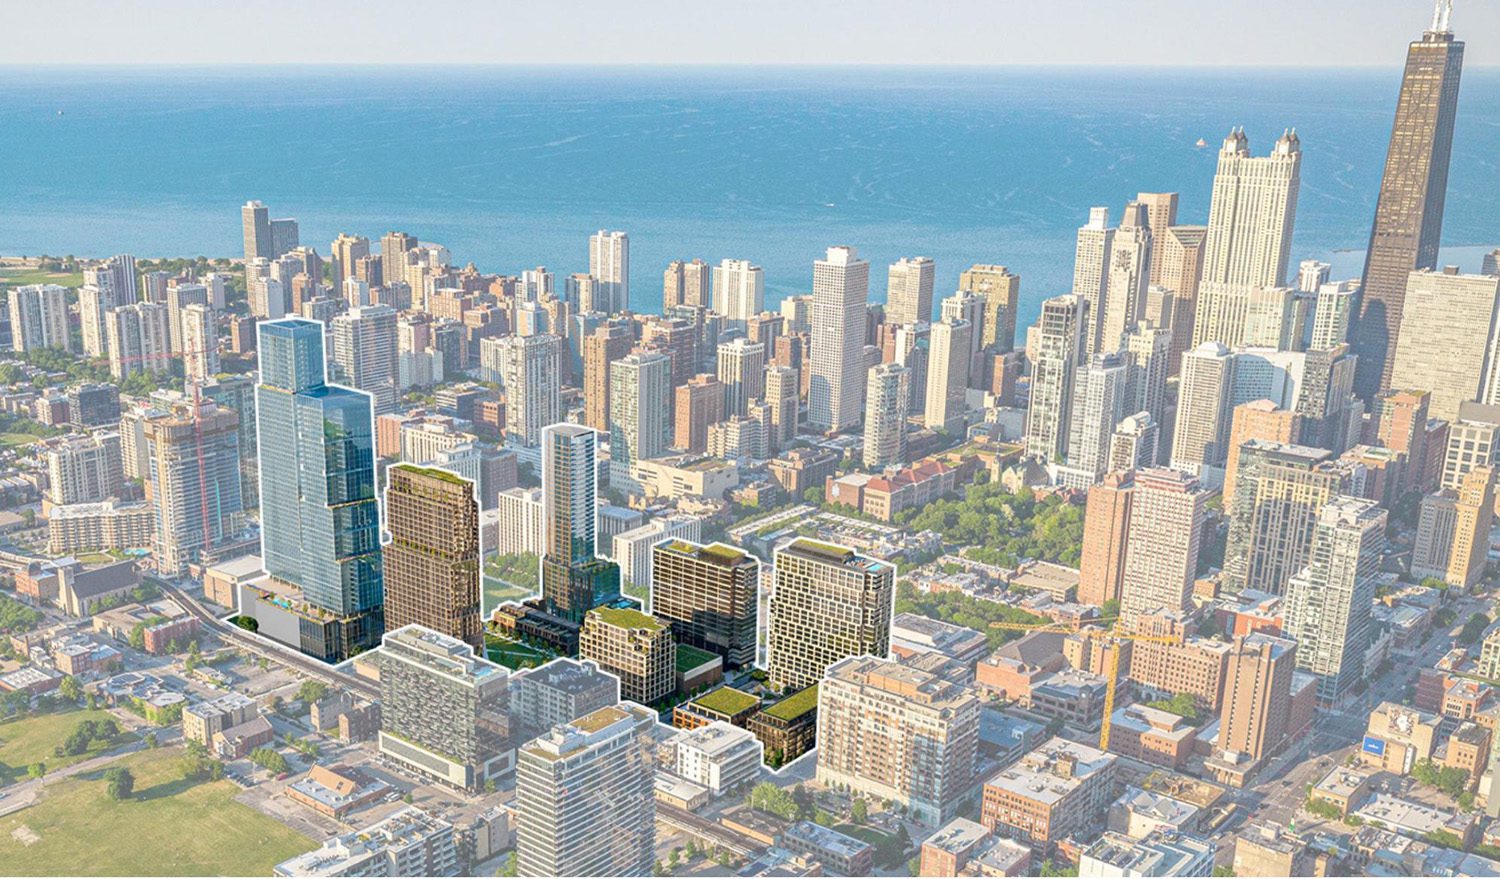 The North Union megadevelopement plans in Old Town Chicago